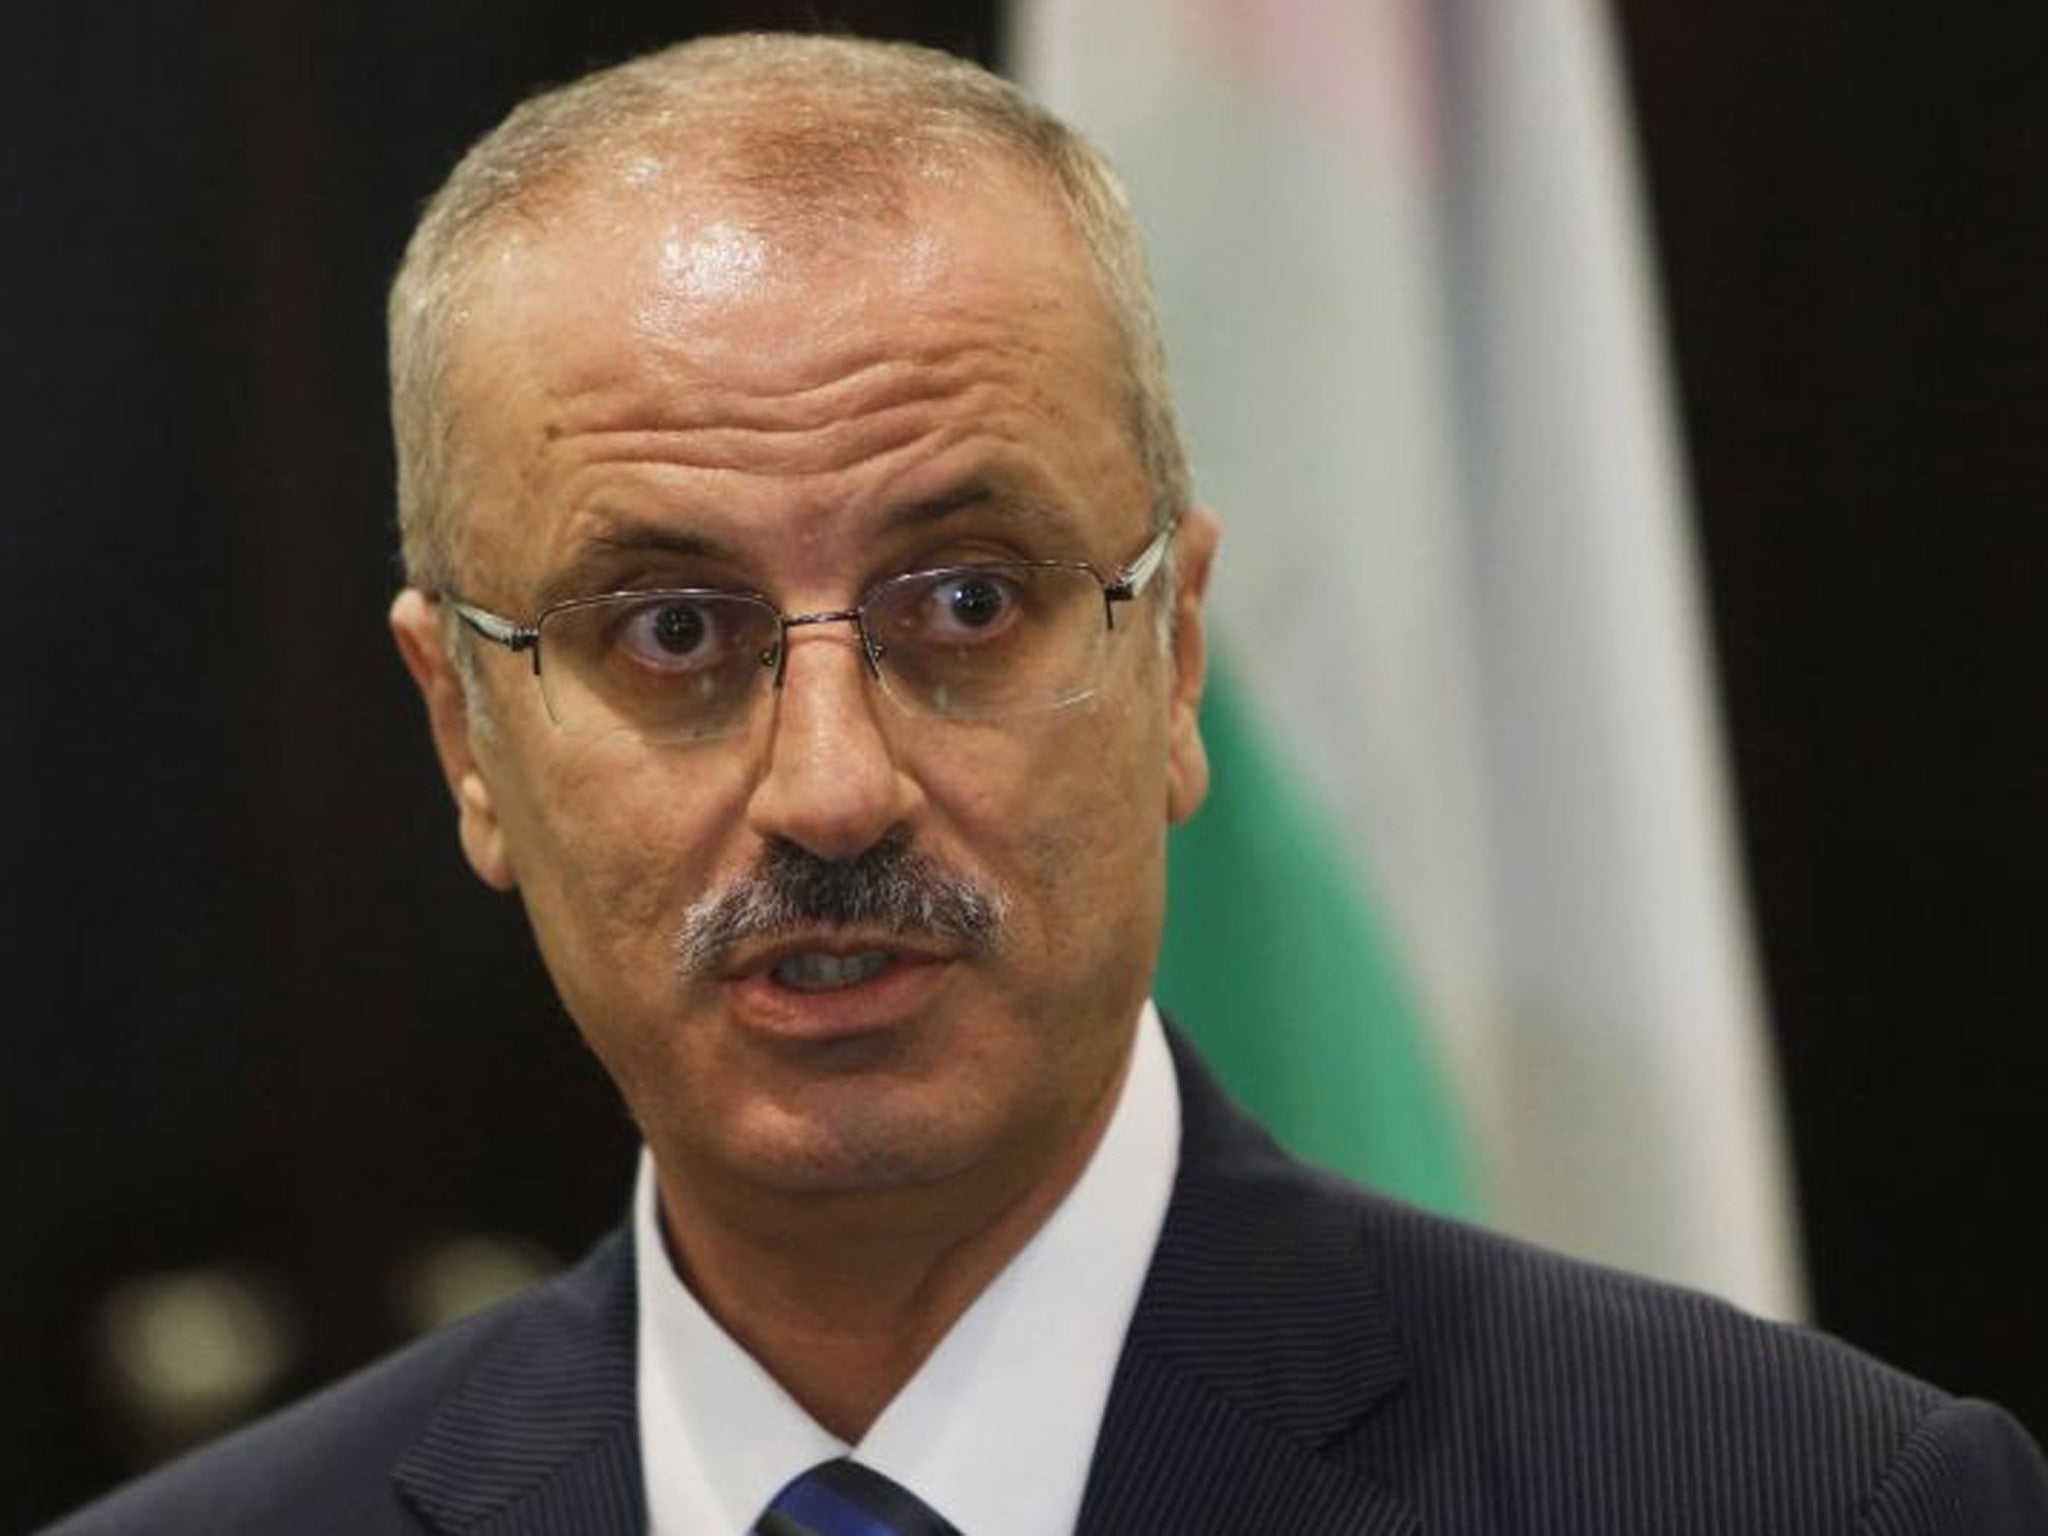 The Palestinian Authority's new Prime Minister, Rami Hamdallah